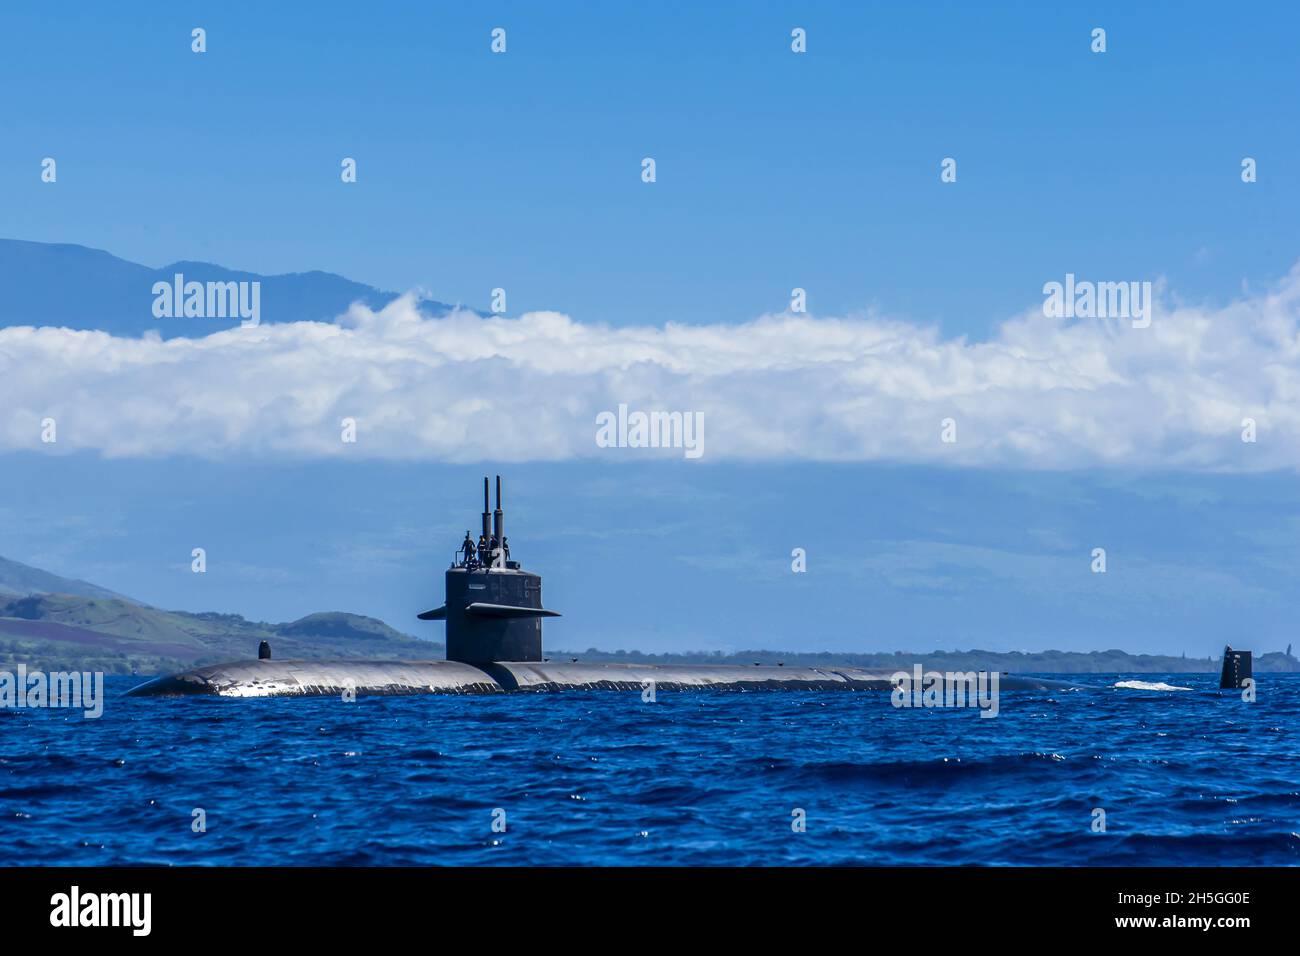 A United States Navy nuclear submarine in the Pacific Ocean. Stock Photo